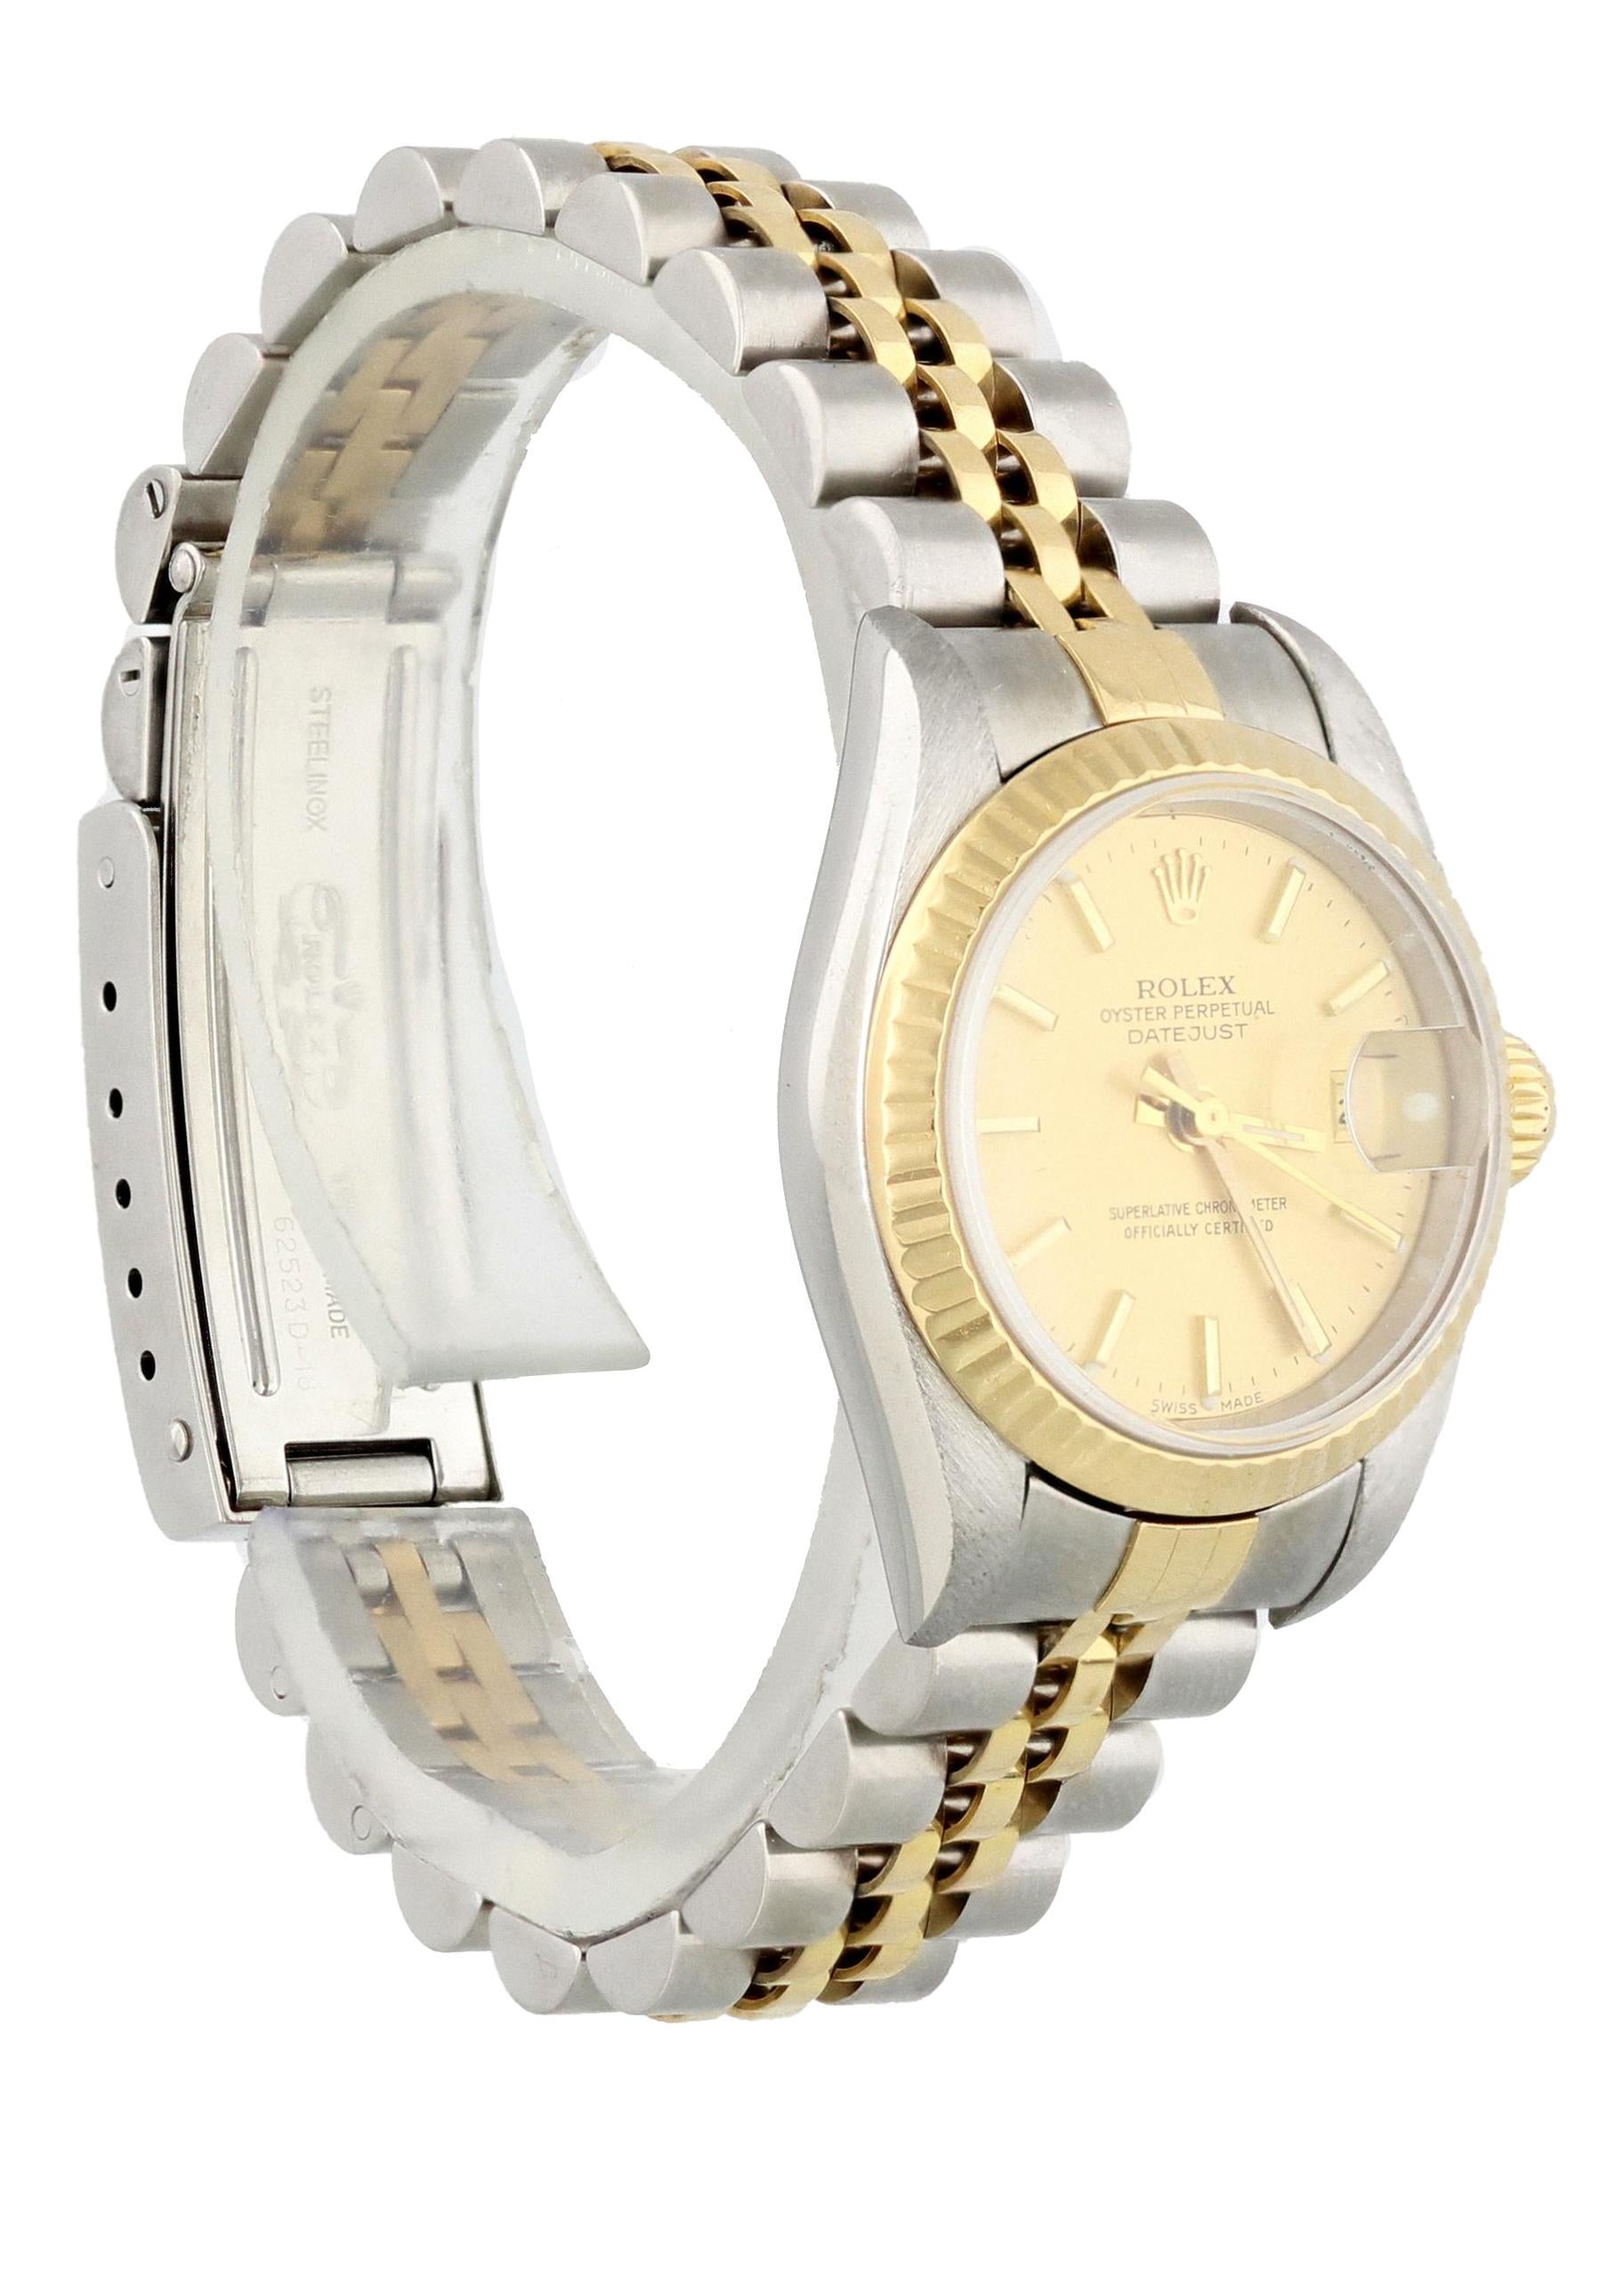 Rolex Datejust 79173 Ladies Watch In Excellent Condition For Sale In New York, NY